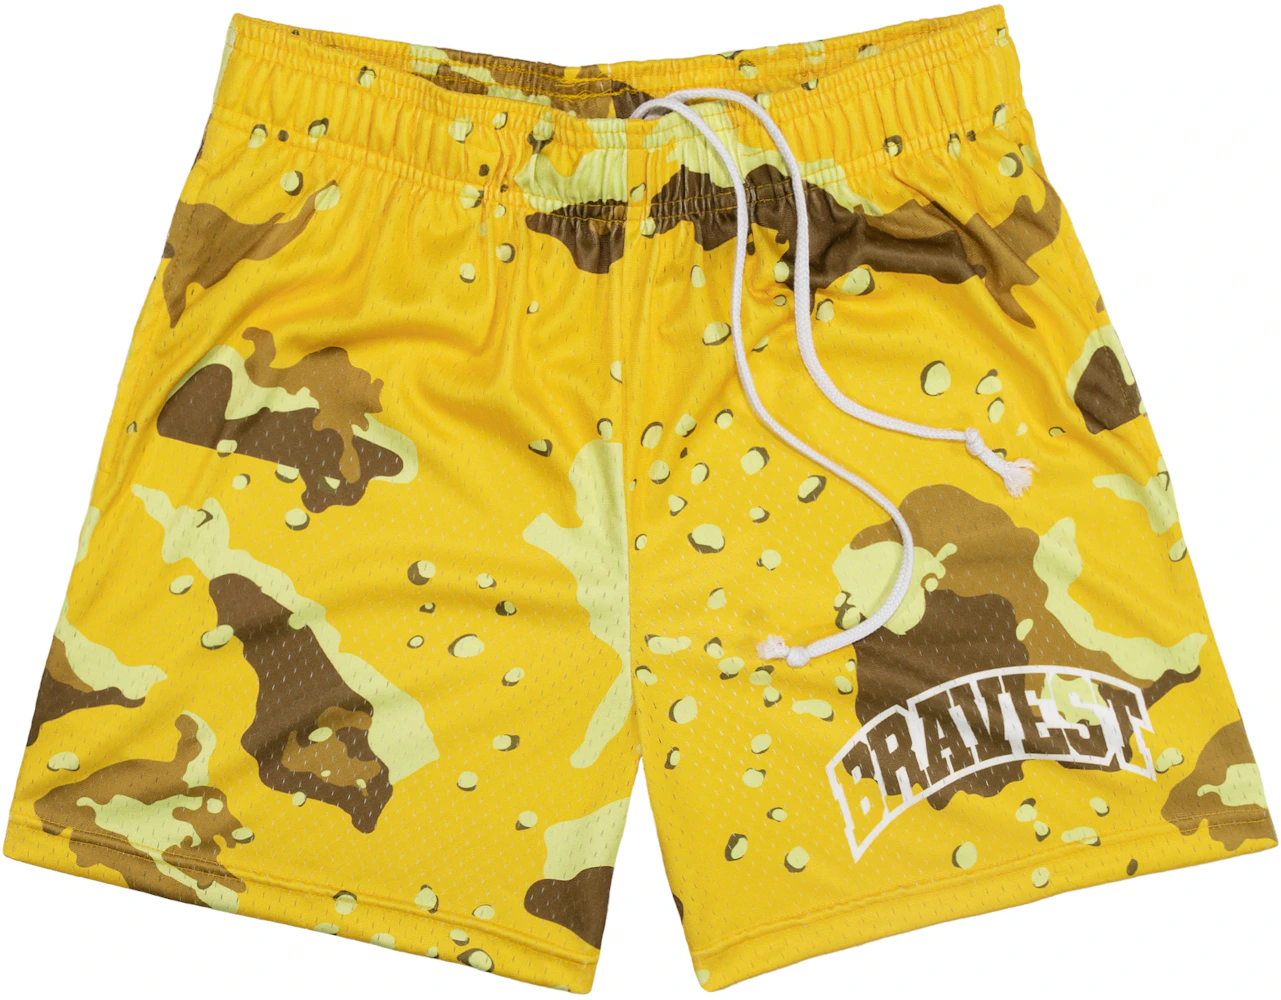 Bravest Studios Lakeshow Shorts (Yellow) for Sale in Los Angeles, CA -  OfferUp